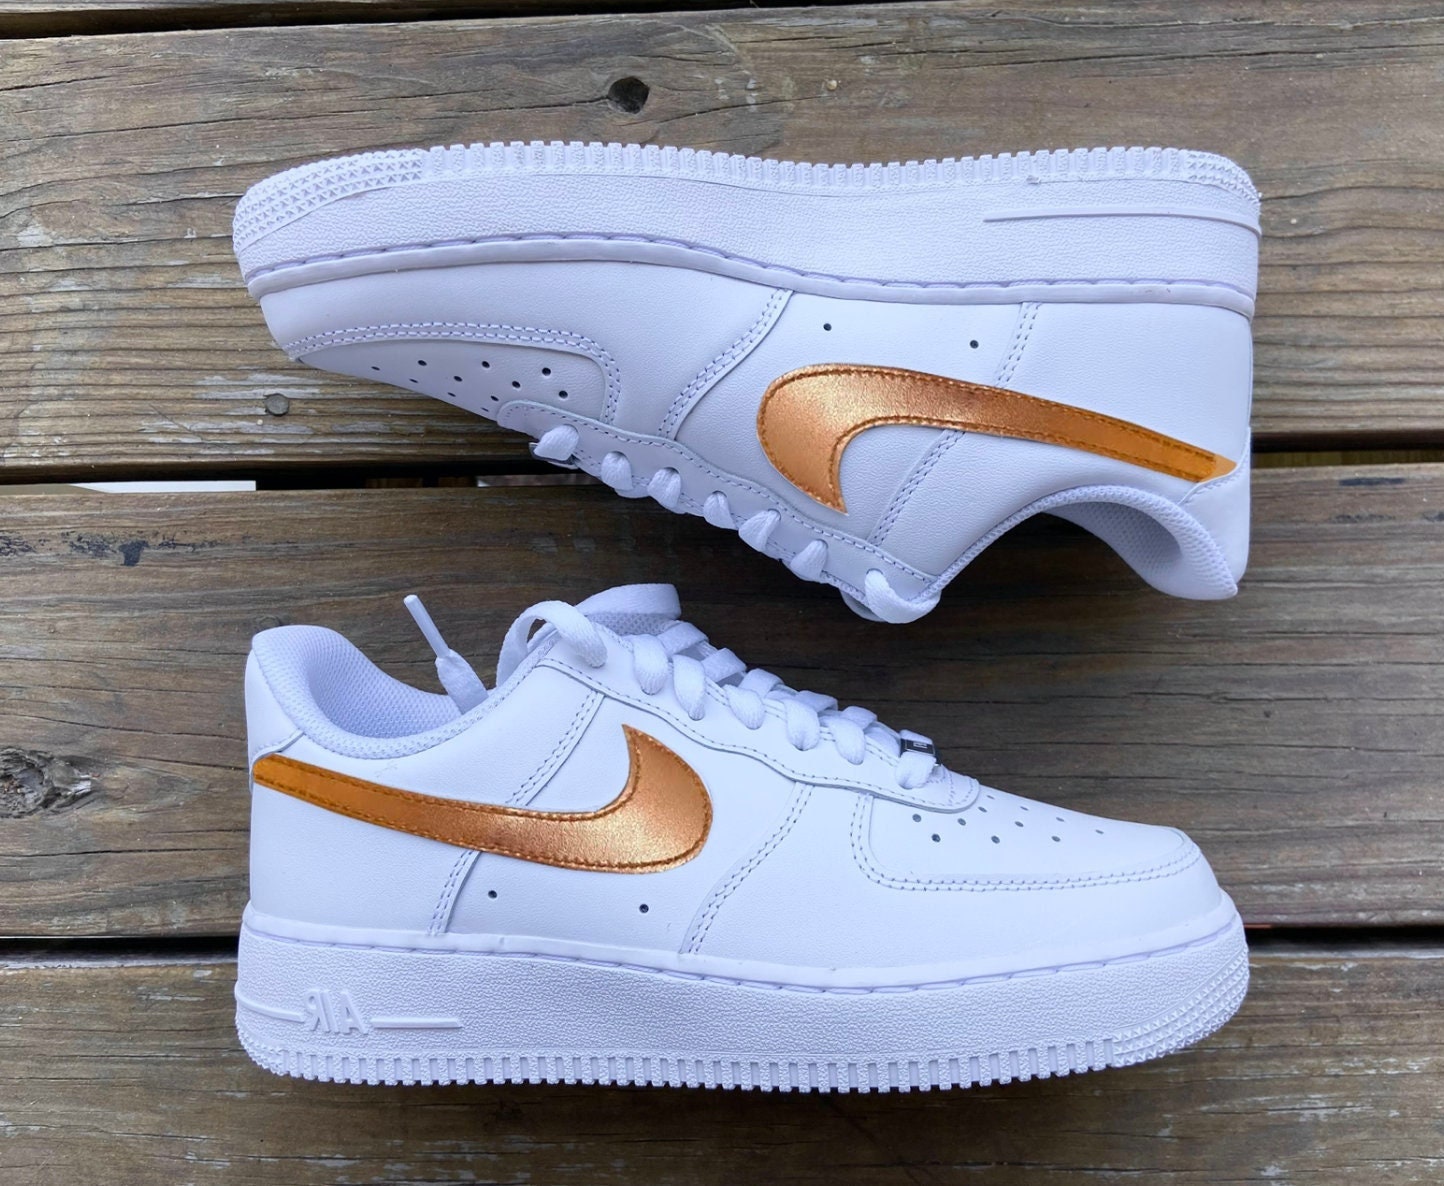 Nike Air Force 1 Rose Gold - Etsy